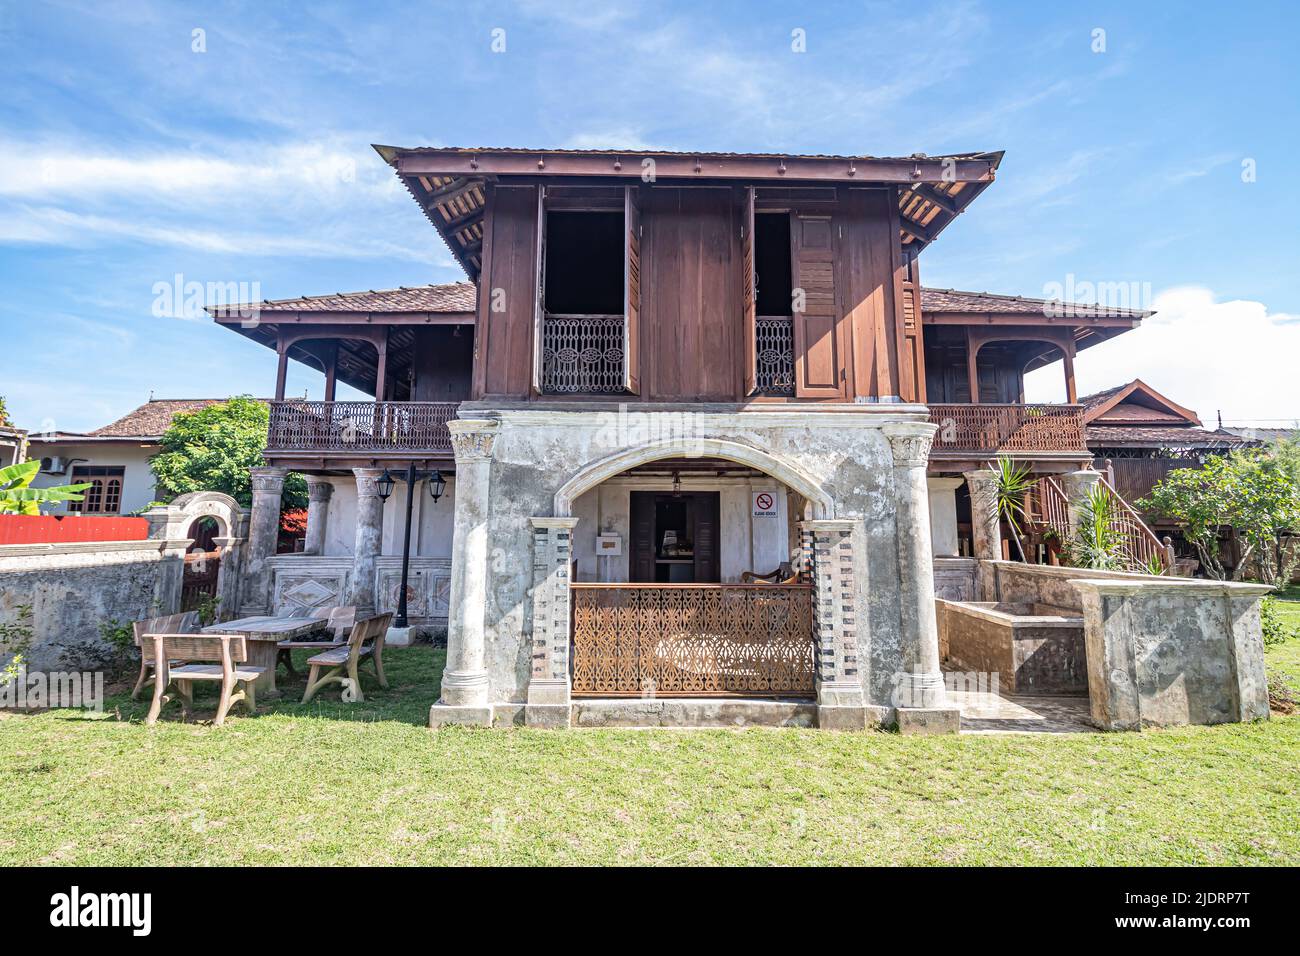 Duyong Old Fort or Kota Lama Duyong, a historic traditional Malay house or mansion built in 1919 at Pulau Duyong in Kuala Terengganu, Malaysia. Stock Photo